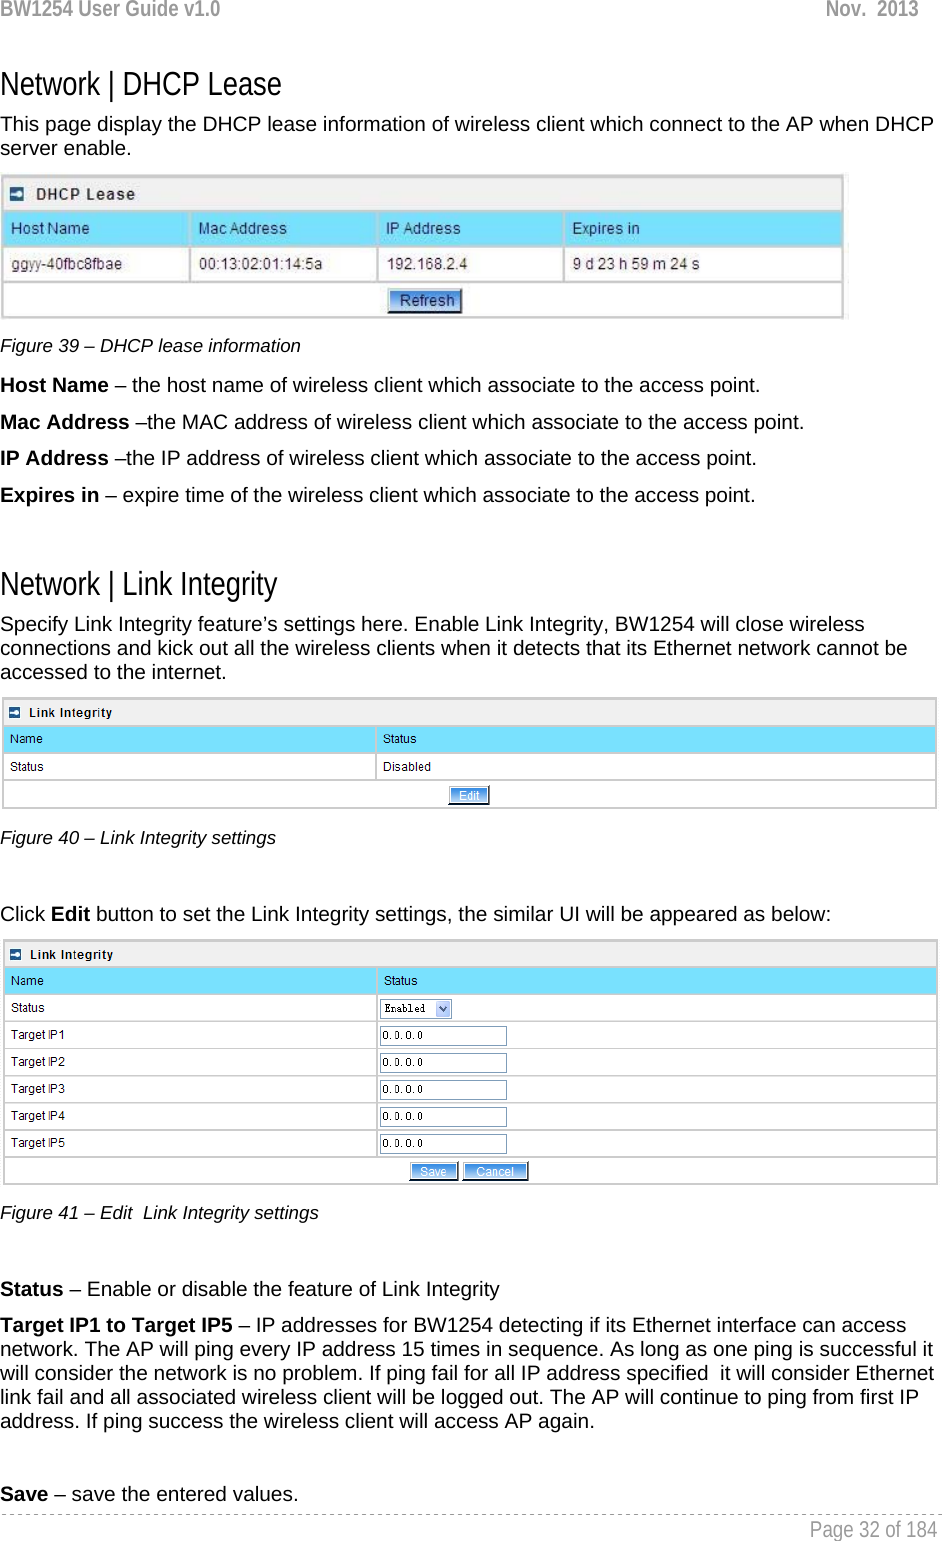 BW1254 User Guide v1.0  Nov.  2013     Page 32 of 184   Network | DHCP Lease This page display the DHCP lease information of wireless client which connect to the AP when DHCP server enable.  Figure 39 – DHCP lease information Host Name – the host name of wireless client which associate to the access point. Mac Address –the MAC address of wireless client which associate to the access point.  IP Address –the IP address of wireless client which associate to the access point. Expires in – expire time of the wireless client which associate to the access point.   Network | Link Integrity Specify Link Integrity feature’s settings here. Enable Link Integrity, BW1254 will close wireless connections and kick out all the wireless clients when it detects that its Ethernet network cannot be accessed to the internet.  Figure 40 – Link Integrity settings  Click Edit button to set the Link Integrity settings, the similar UI will be appeared as below:  Figure 41 – Edit  Link Integrity settings  Status – Enable or disable the feature of Link Integrity Target IP1 to Target IP5 – IP addresses for BW1254 detecting if its Ethernet interface can access  network. The AP will ping every IP address 15 times in sequence. As long as one ping is successful it will consider the network is no problem. If ping fail for all IP address specified  it will consider Ethernet link fail and all associated wireless client will be logged out. The AP will continue to ping from first IP address. If ping success the wireless client will access AP again.  Save – save the entered values. 